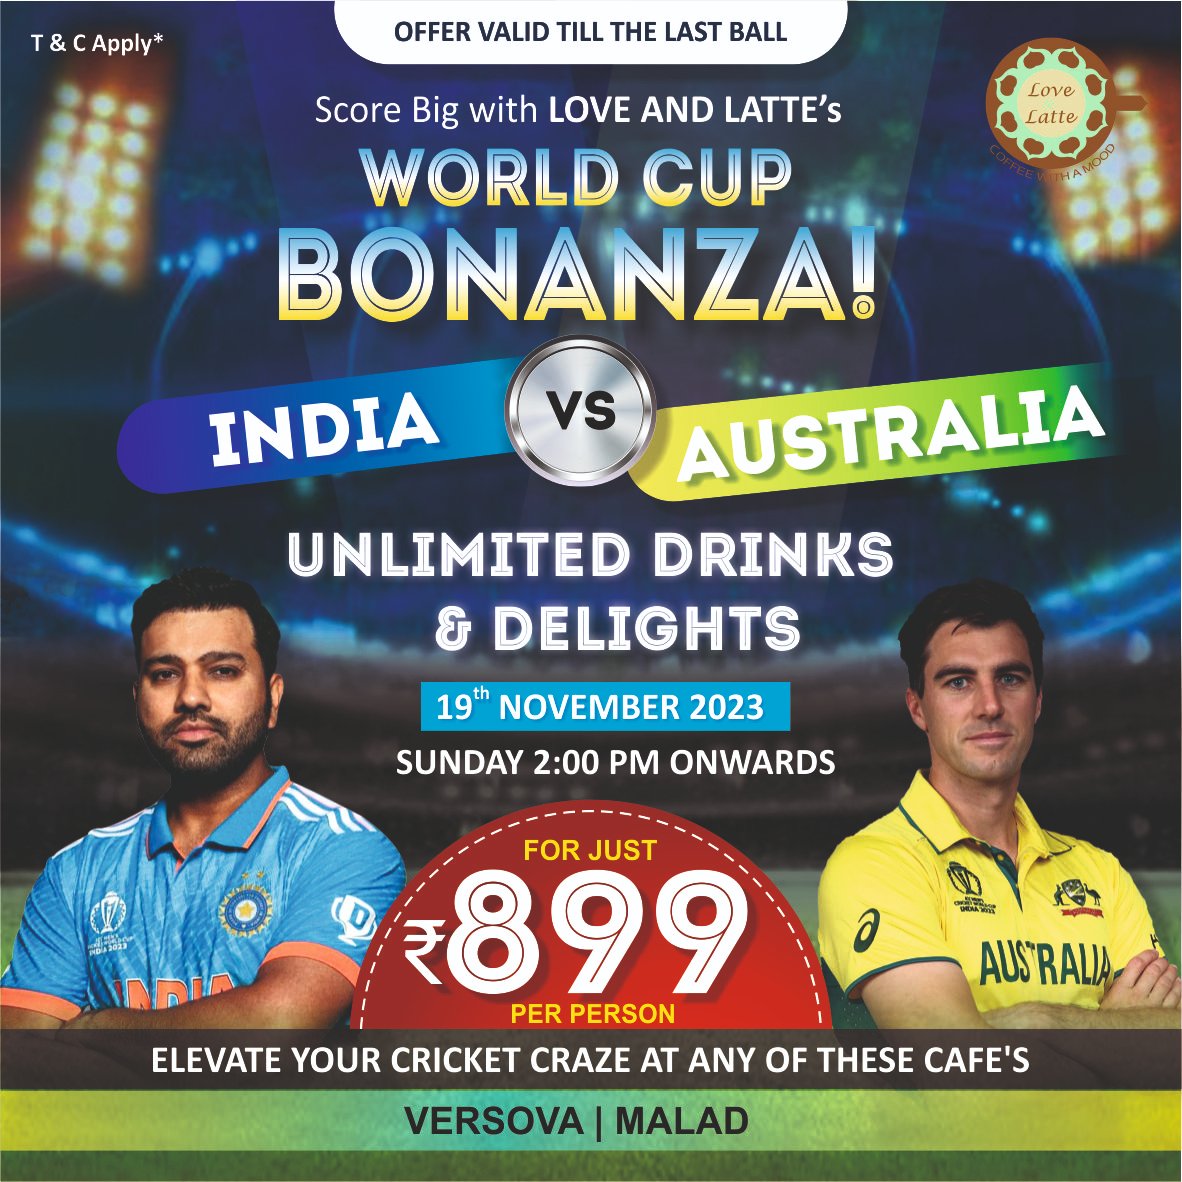 Enjoying the thrilling Cricket World Cup action with a side of caffeine at Love & Latte! ☕🏏

Catch every exciting moment live on our big screen.

#cricket #livestreaming #unlimitedfood #drinks #coffee #coffeewithamood #lovenlattecoffeeroasters #lovenlattecoffeeroasting